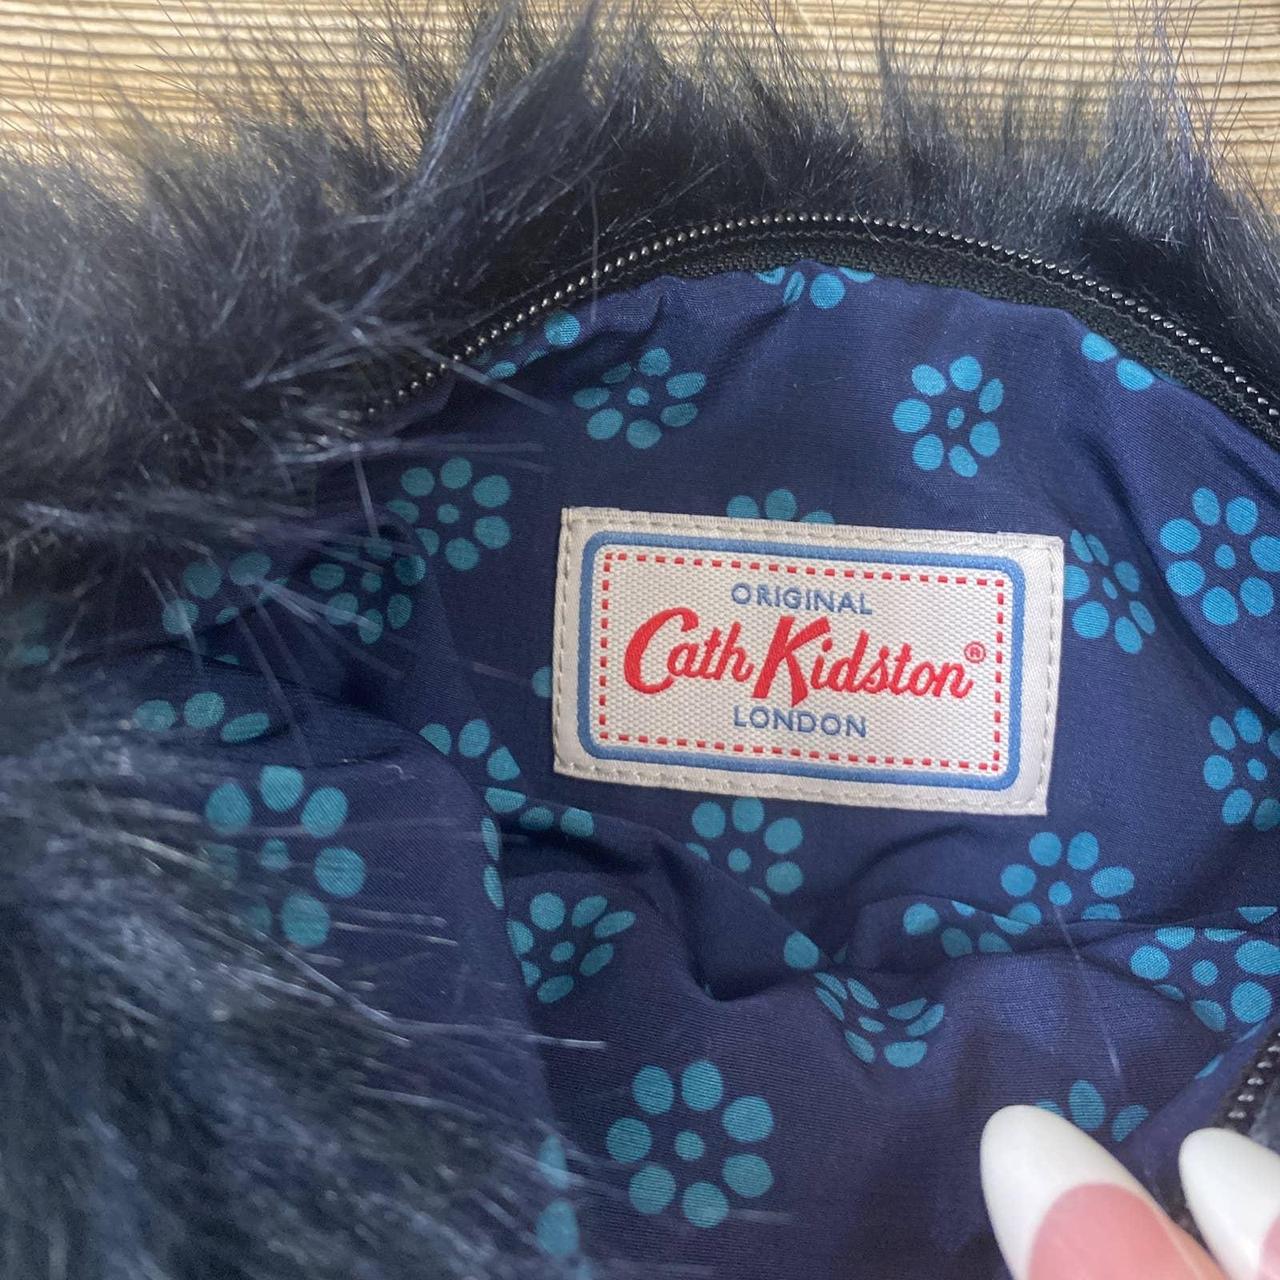 Cath Kidston Women's Blue and Grey Bag (4)